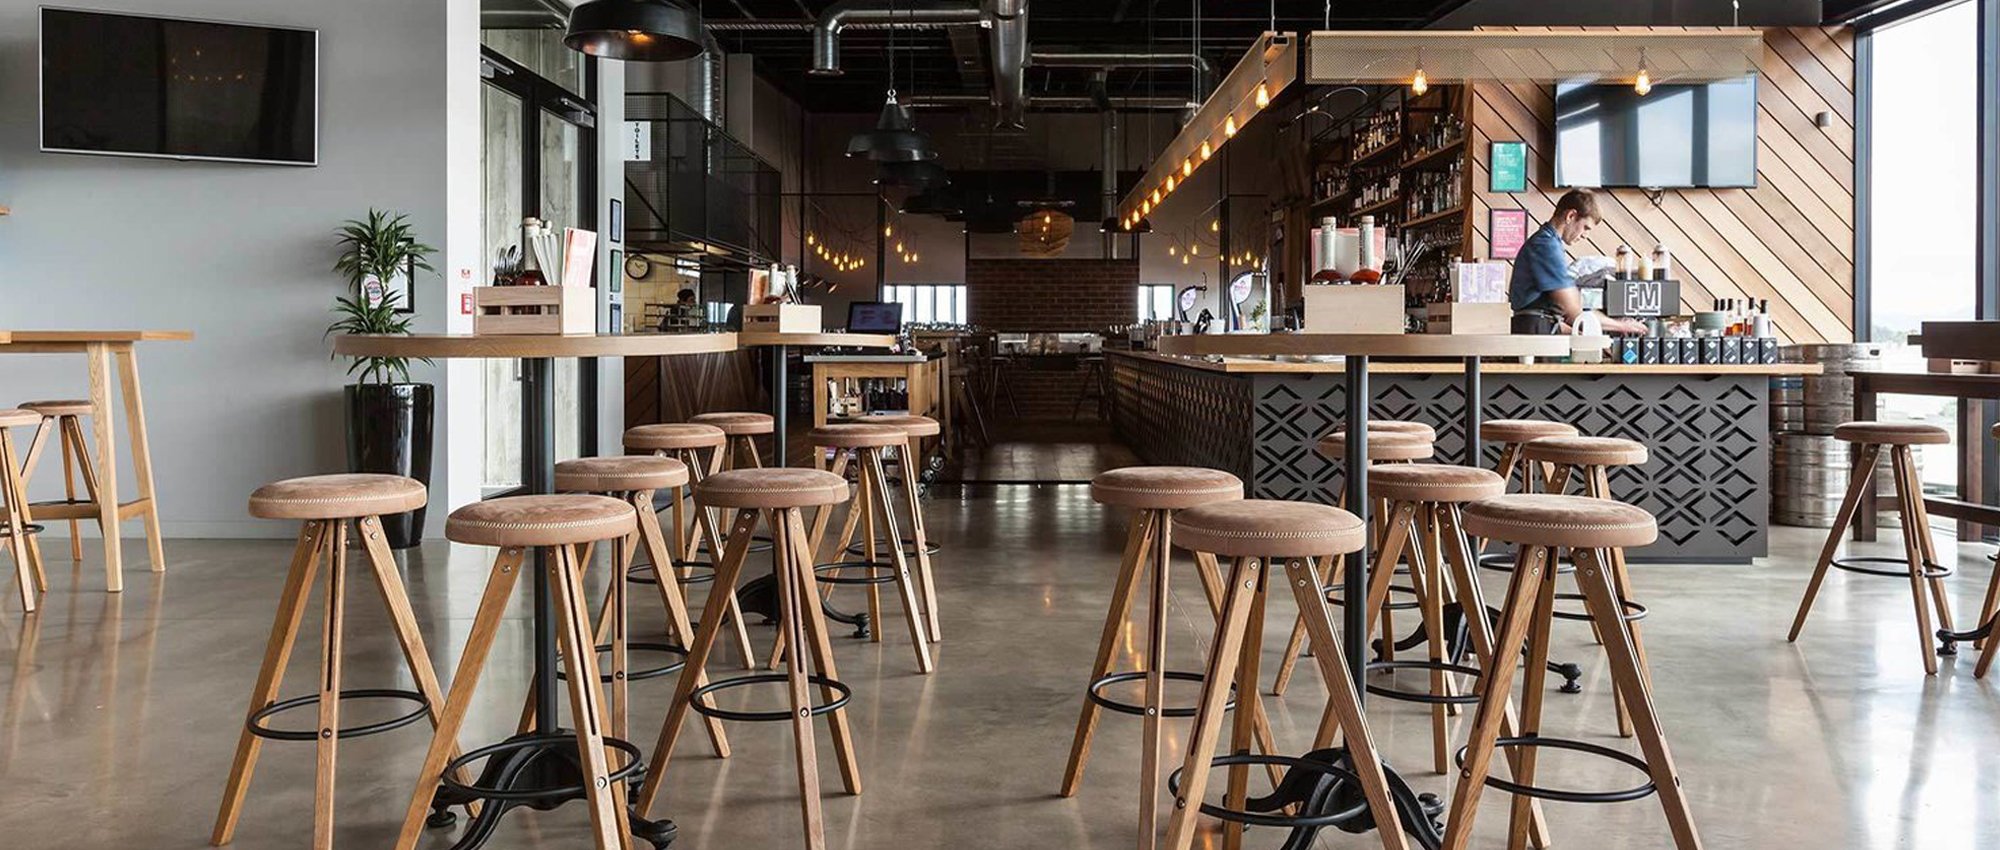 bar and restaurant space with custom wooden chairs, tabletops, benches and wall designs